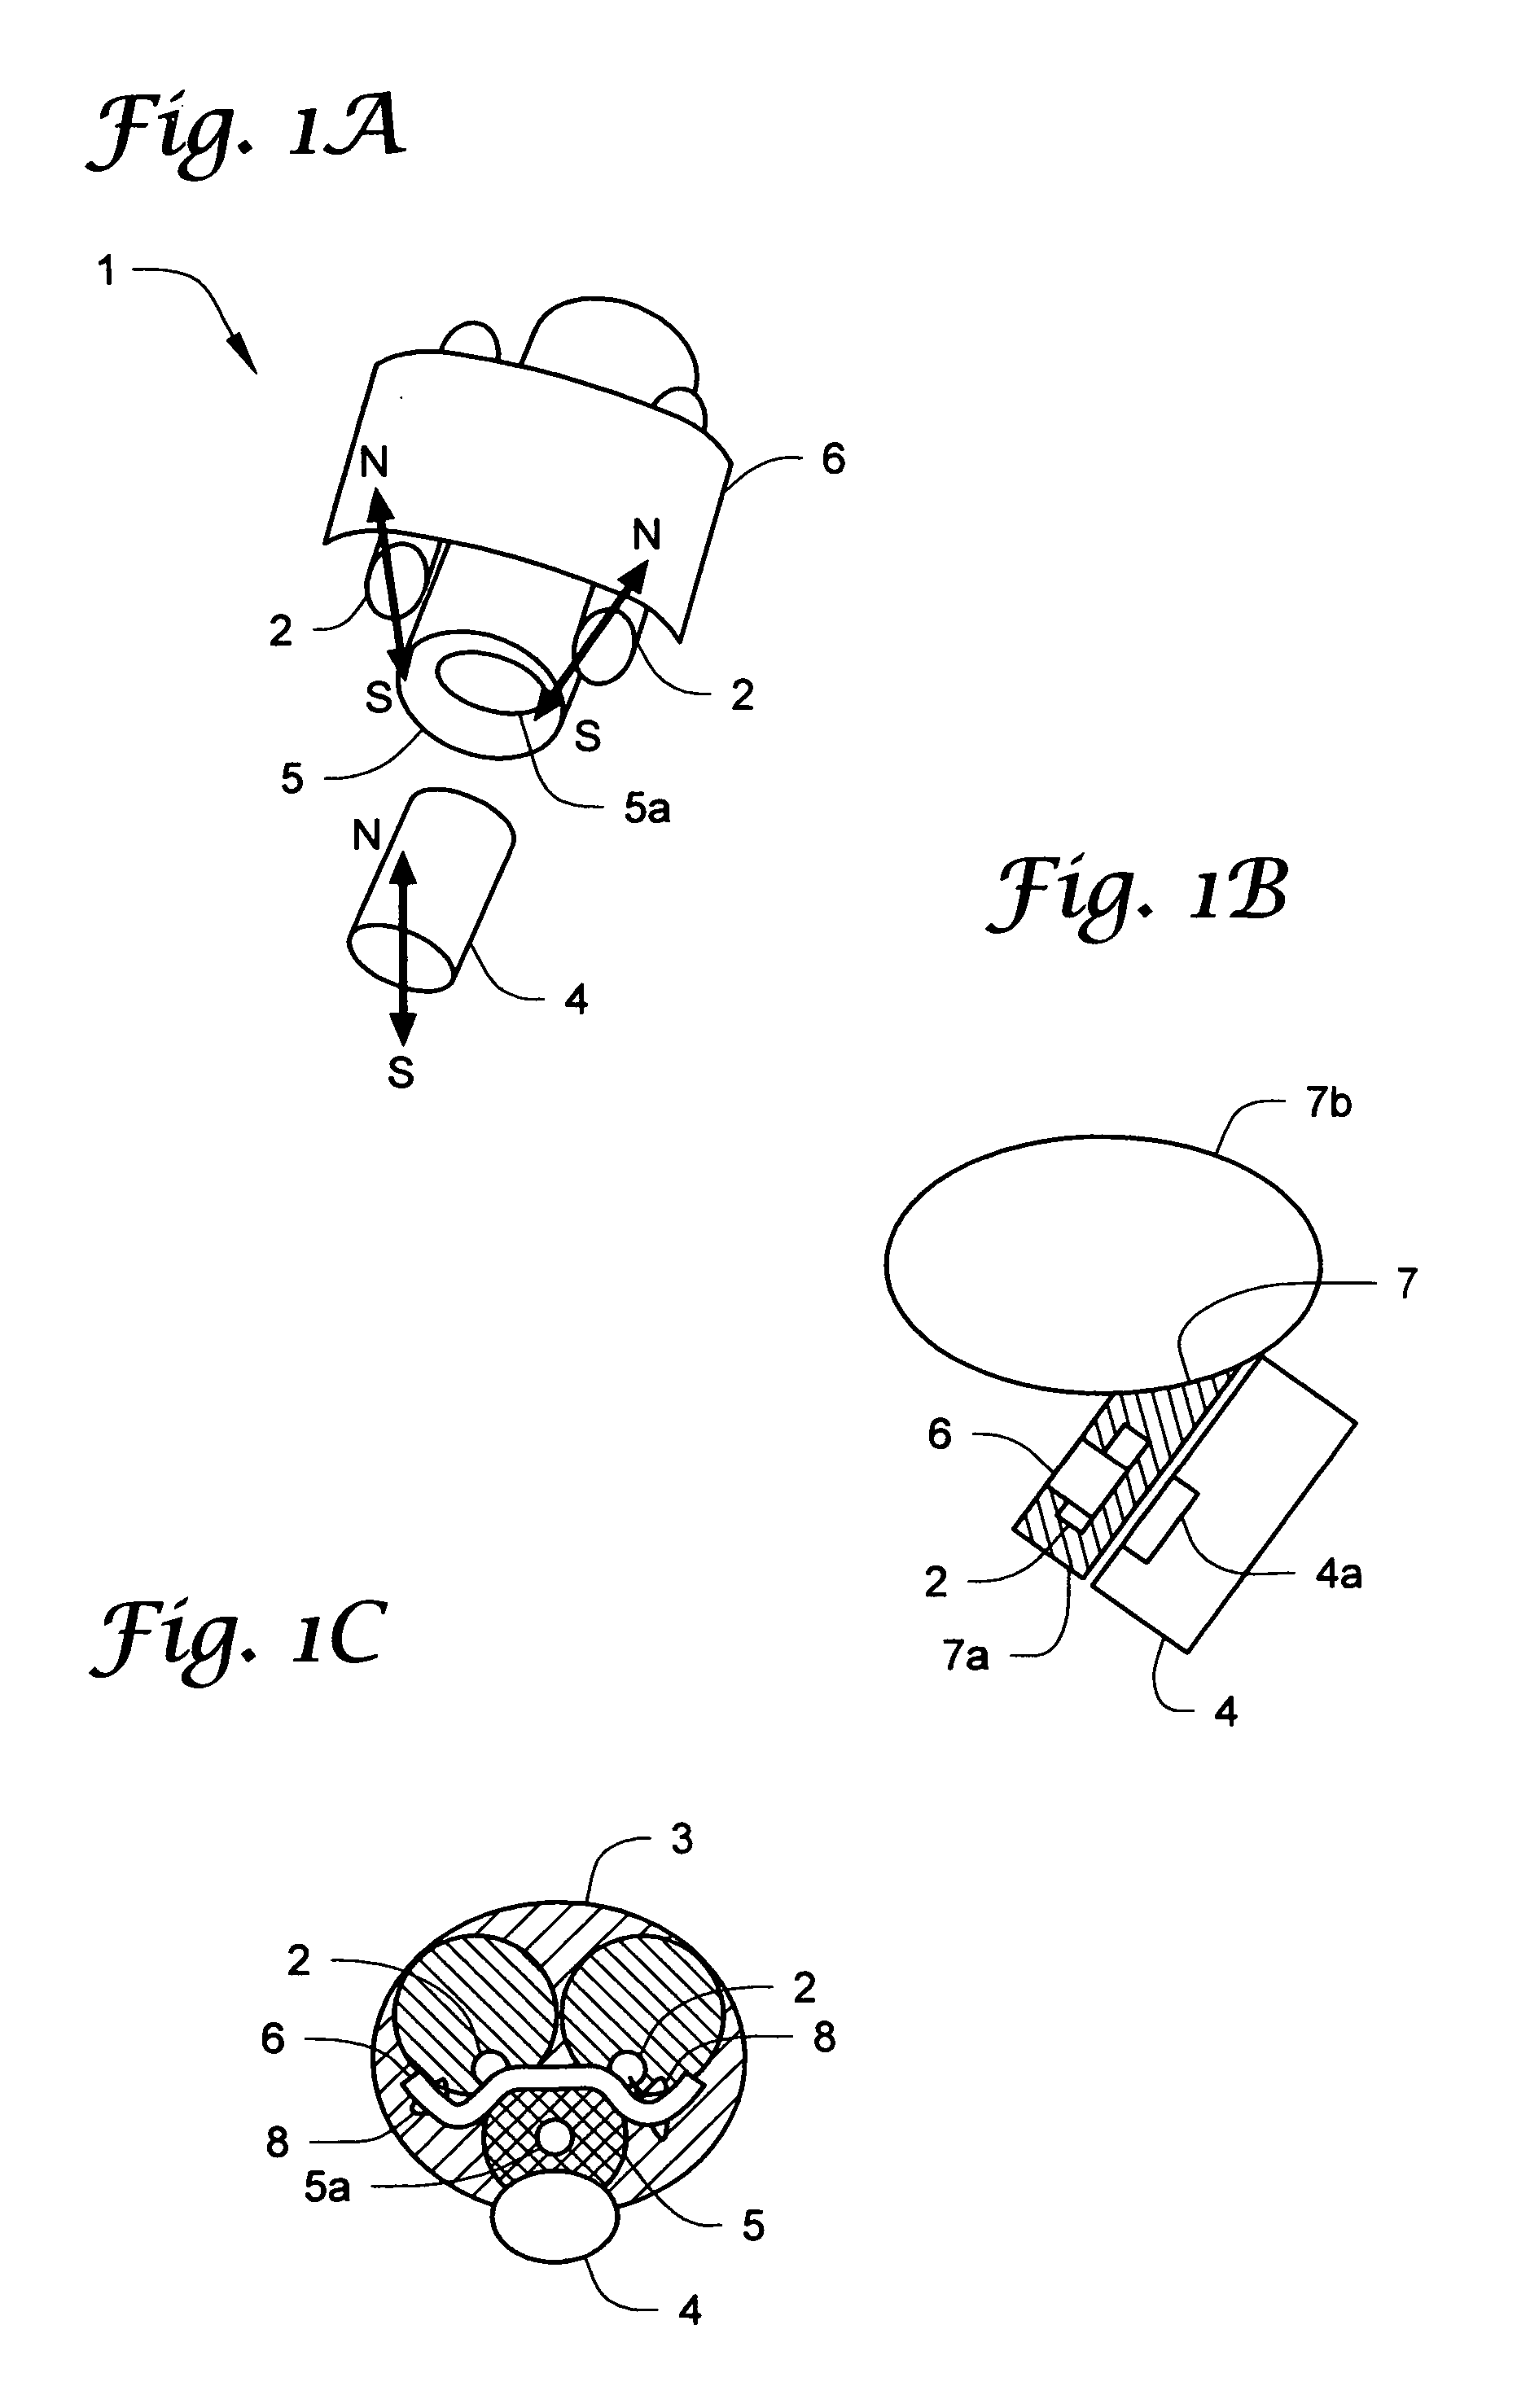 Urethral occlusive assembly for preventing urinary incontinence